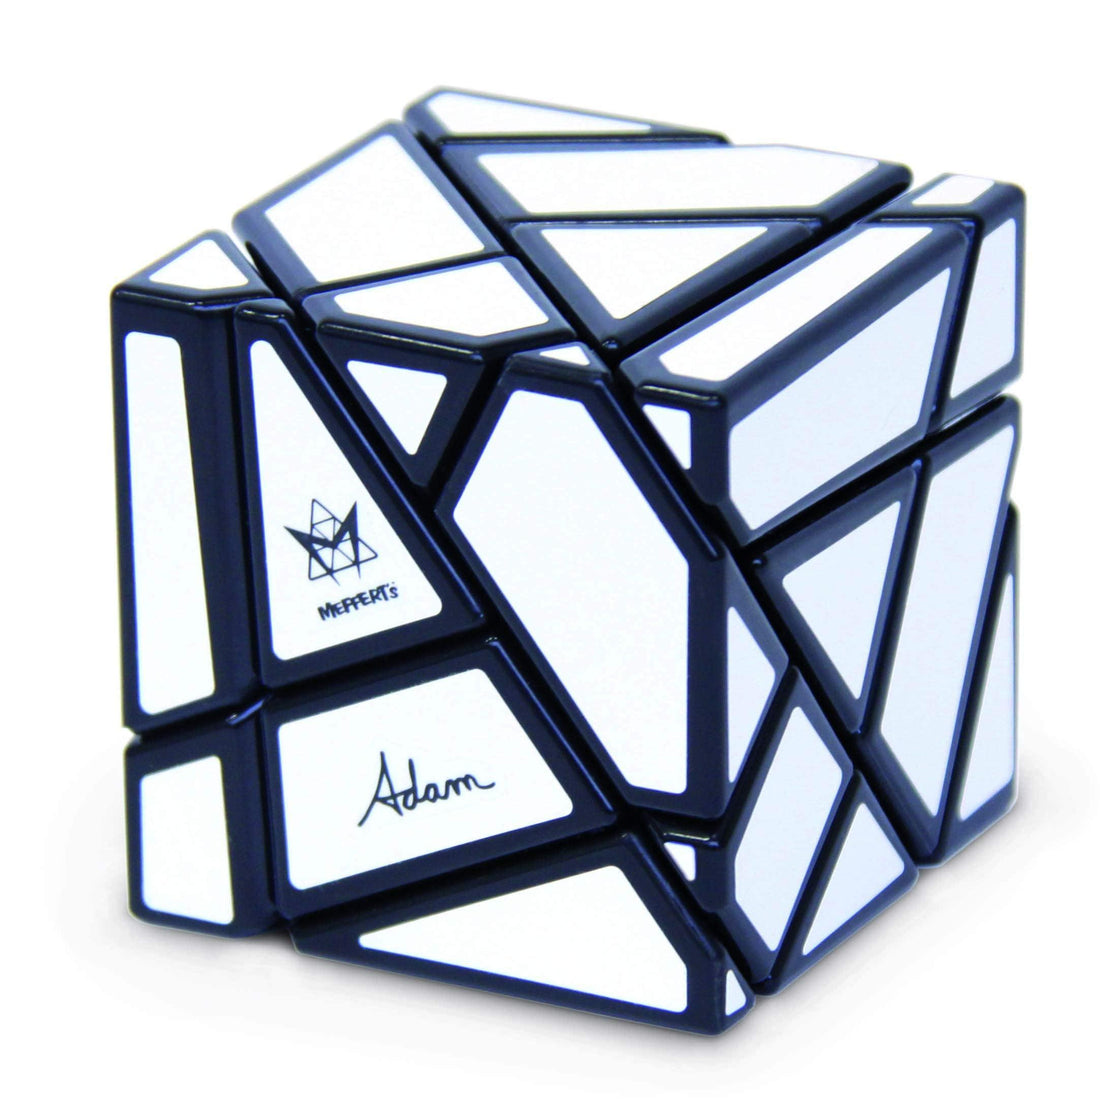 Ghost Cube Speed Cube Puzzle - Kitty Hawk Kites Online Store